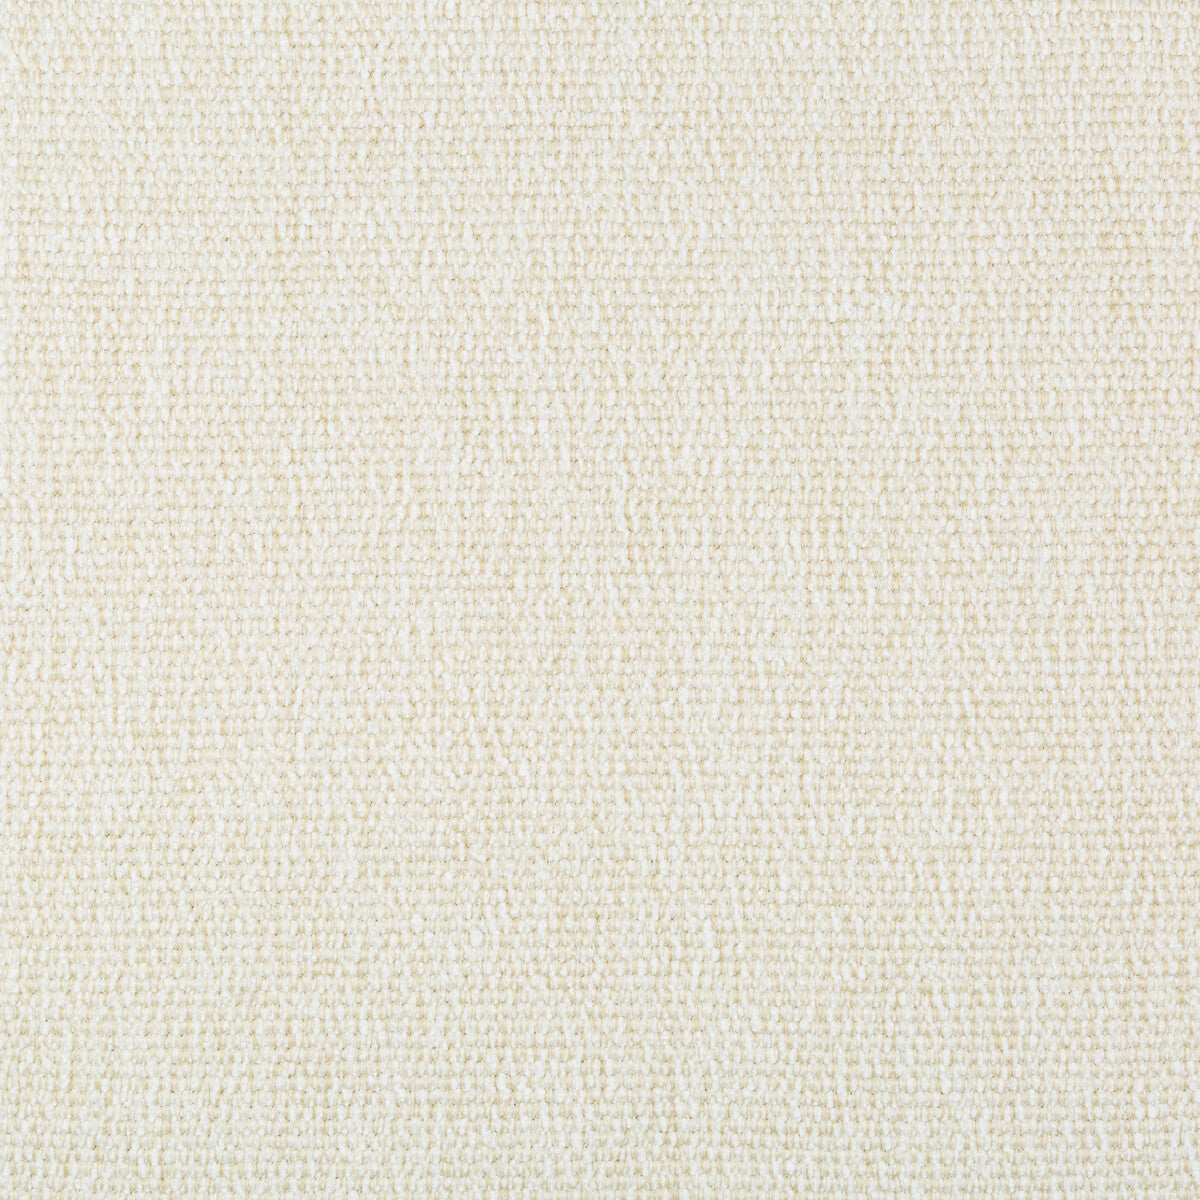 At The Helm fabric in white sand color - pattern 35538.1.0 - by Kravet Couture in the Vista collection